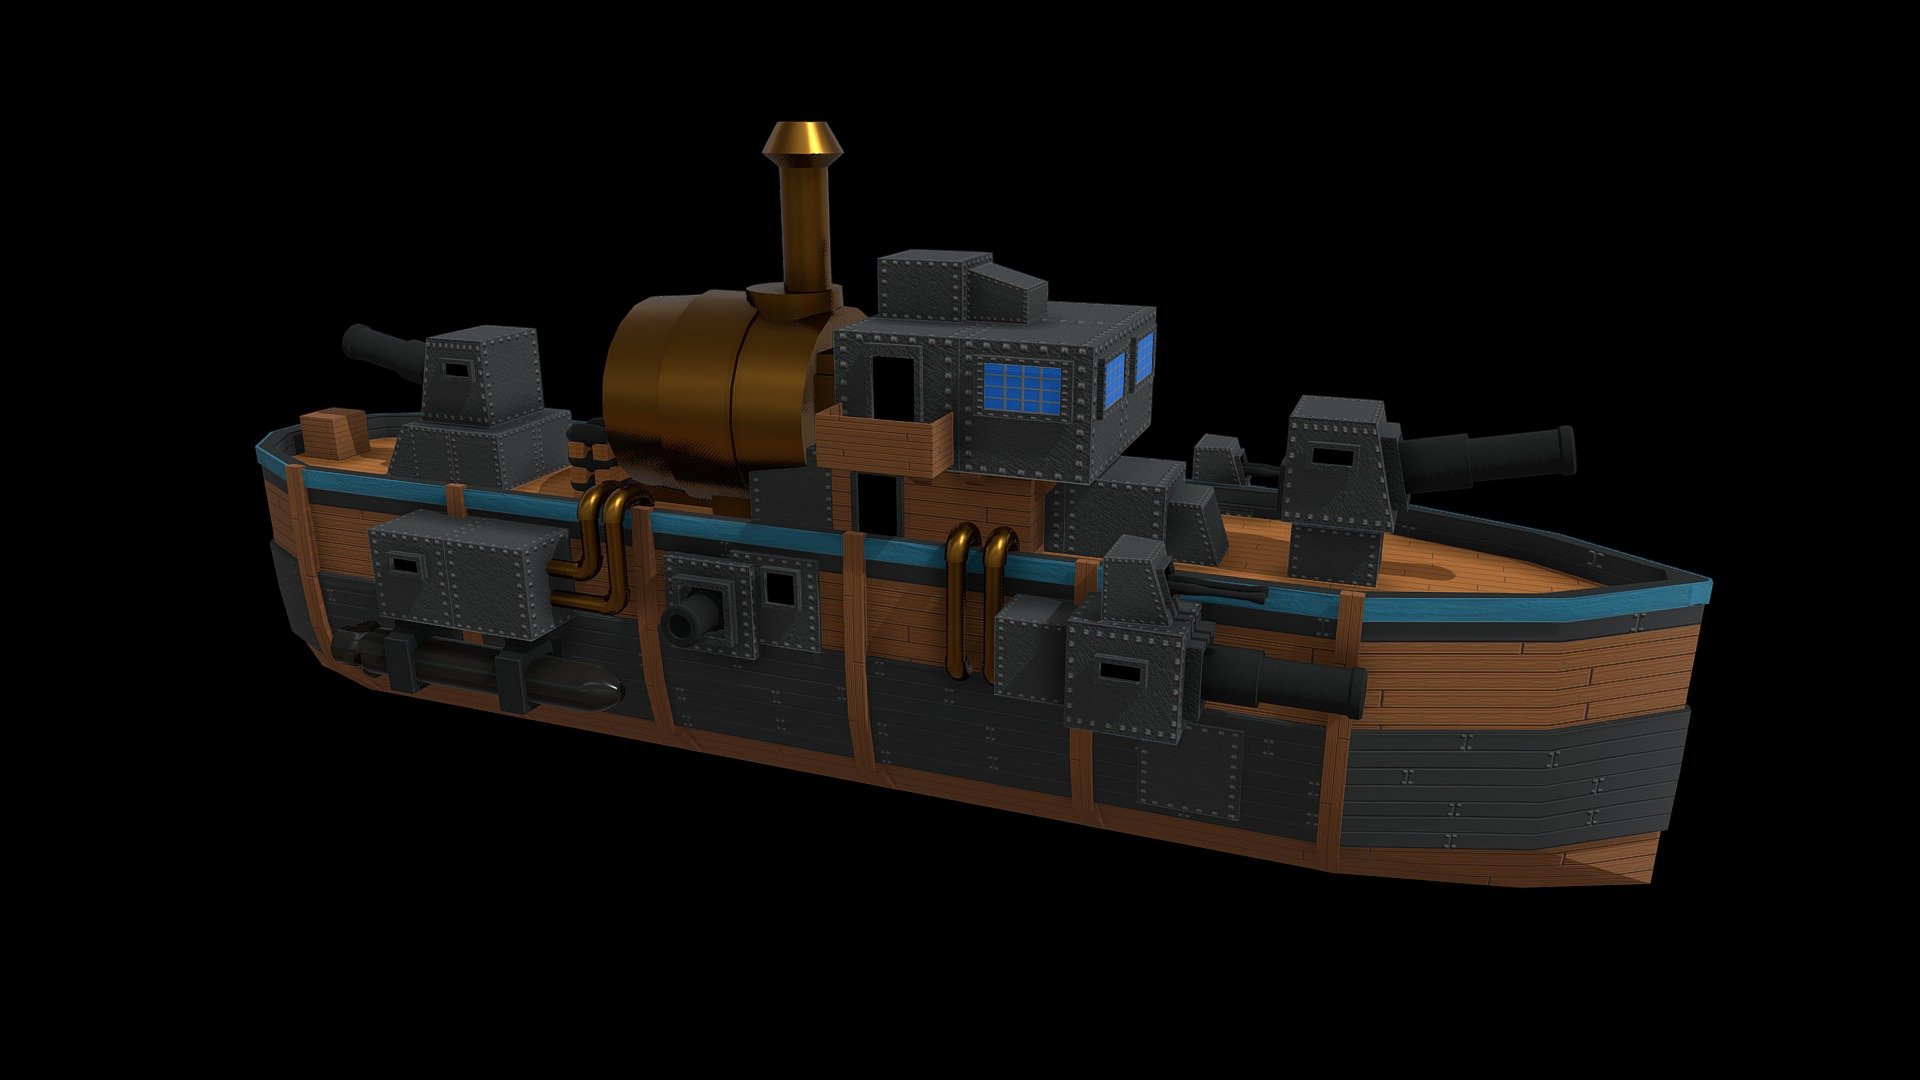 pre-1900s stylized destroyer

-destroyer war ship with 2 front firing cannons. 1 front turret.  1 back turret. 2 side turrets 

-this is part of a collection of ships https://skfb.ly/oHOAO - War Ship Destroyer - Buy Royalty Free 3D model by Randall_3D 3d model